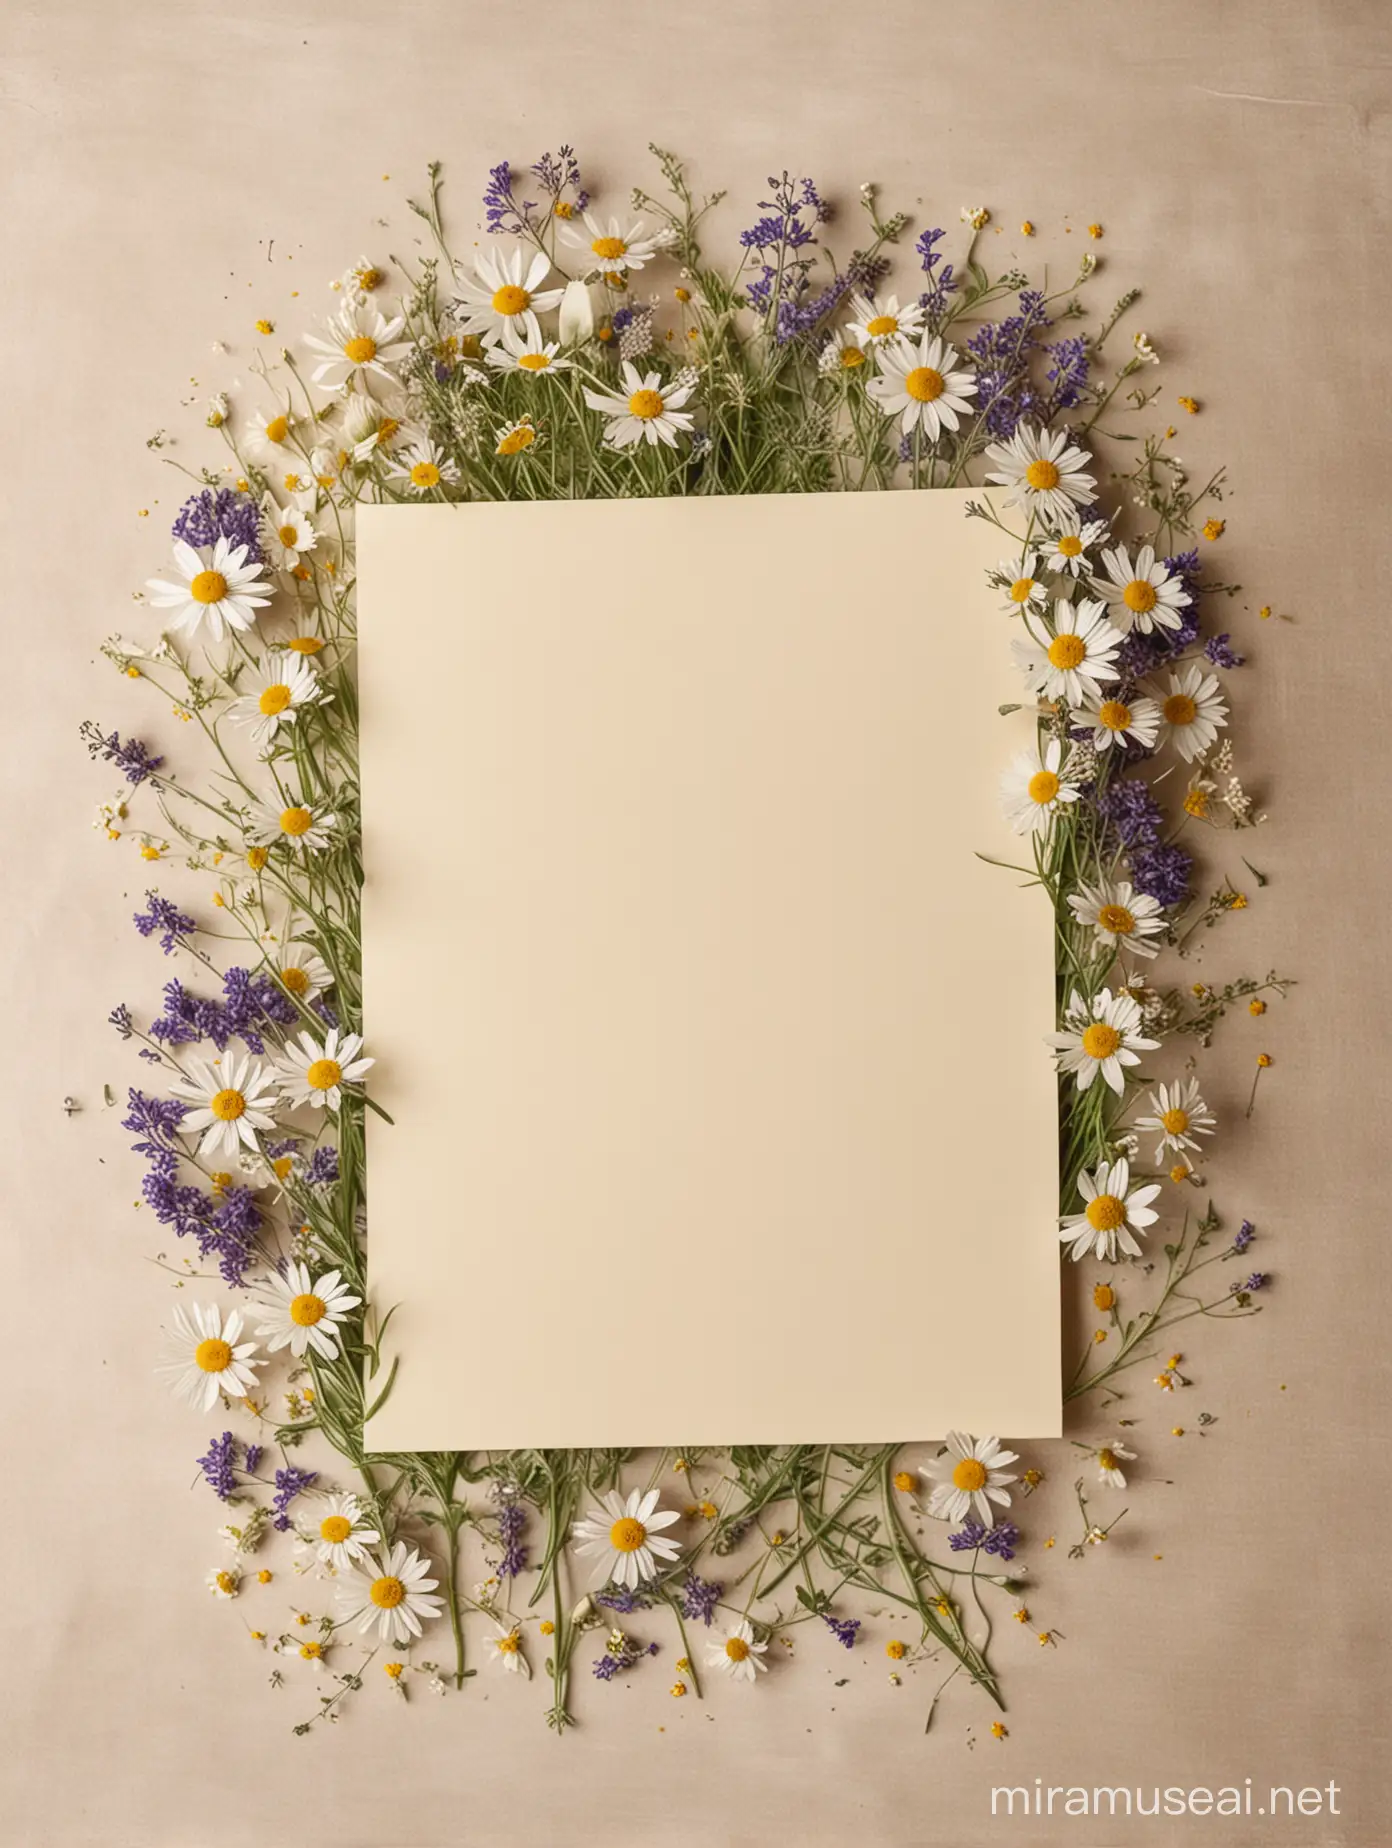 Blank cream paper, flat lay, scattered wildflowers bouquet, natural light, shadows